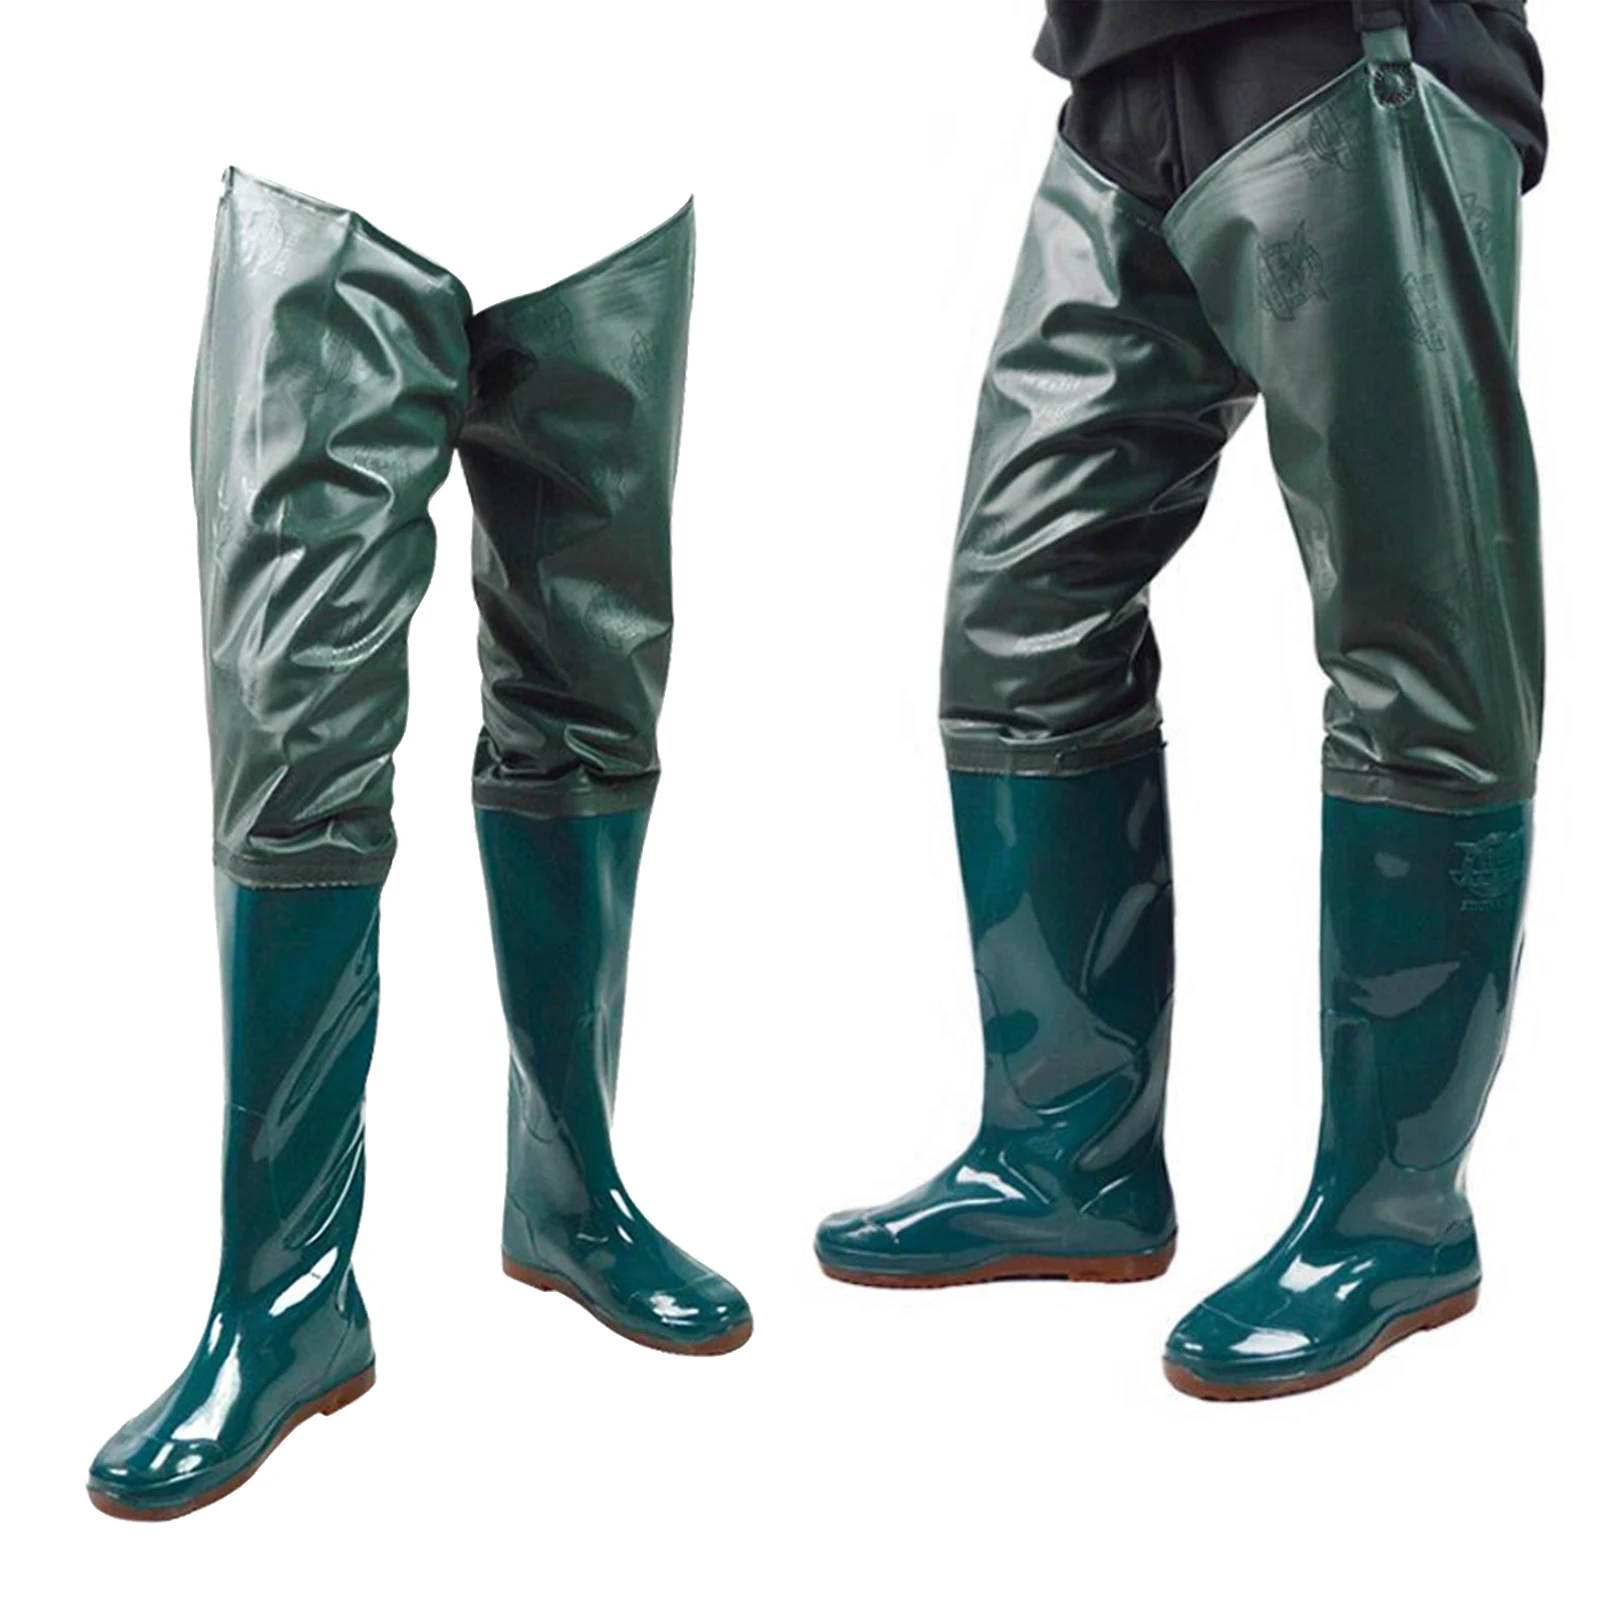 Deluxe Fishing Hip Waders Men Women Wading Pants Trousers with Boots Waterproof Breathable Hip Boots Stocking